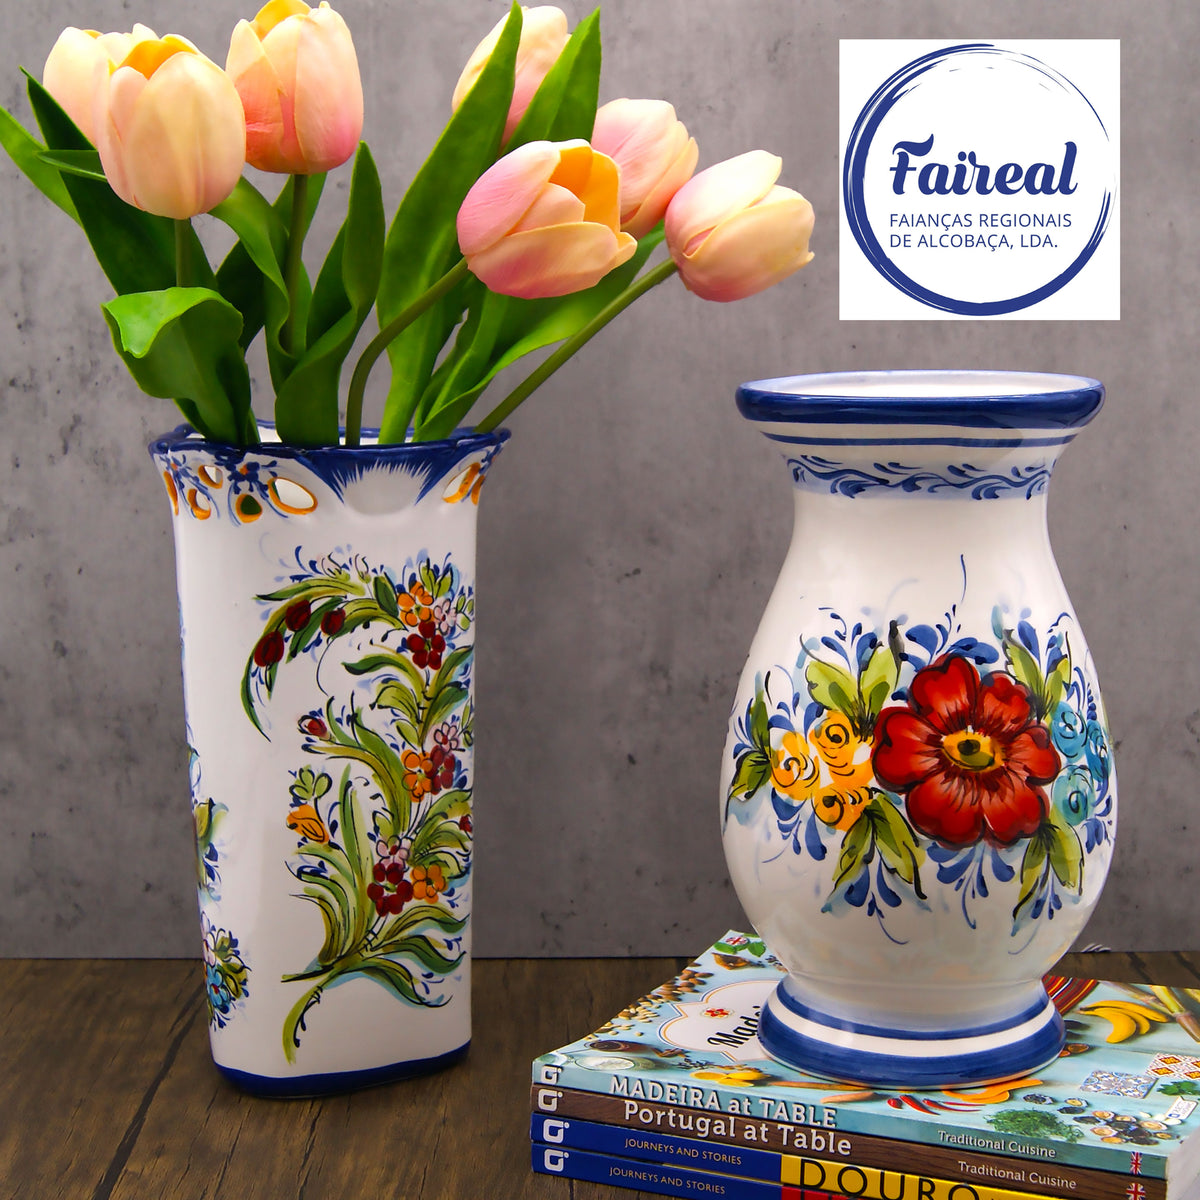 Alcaboca pottery hand painted decorative vases. Made in Portugal by a family of artisans according to antique techniques.